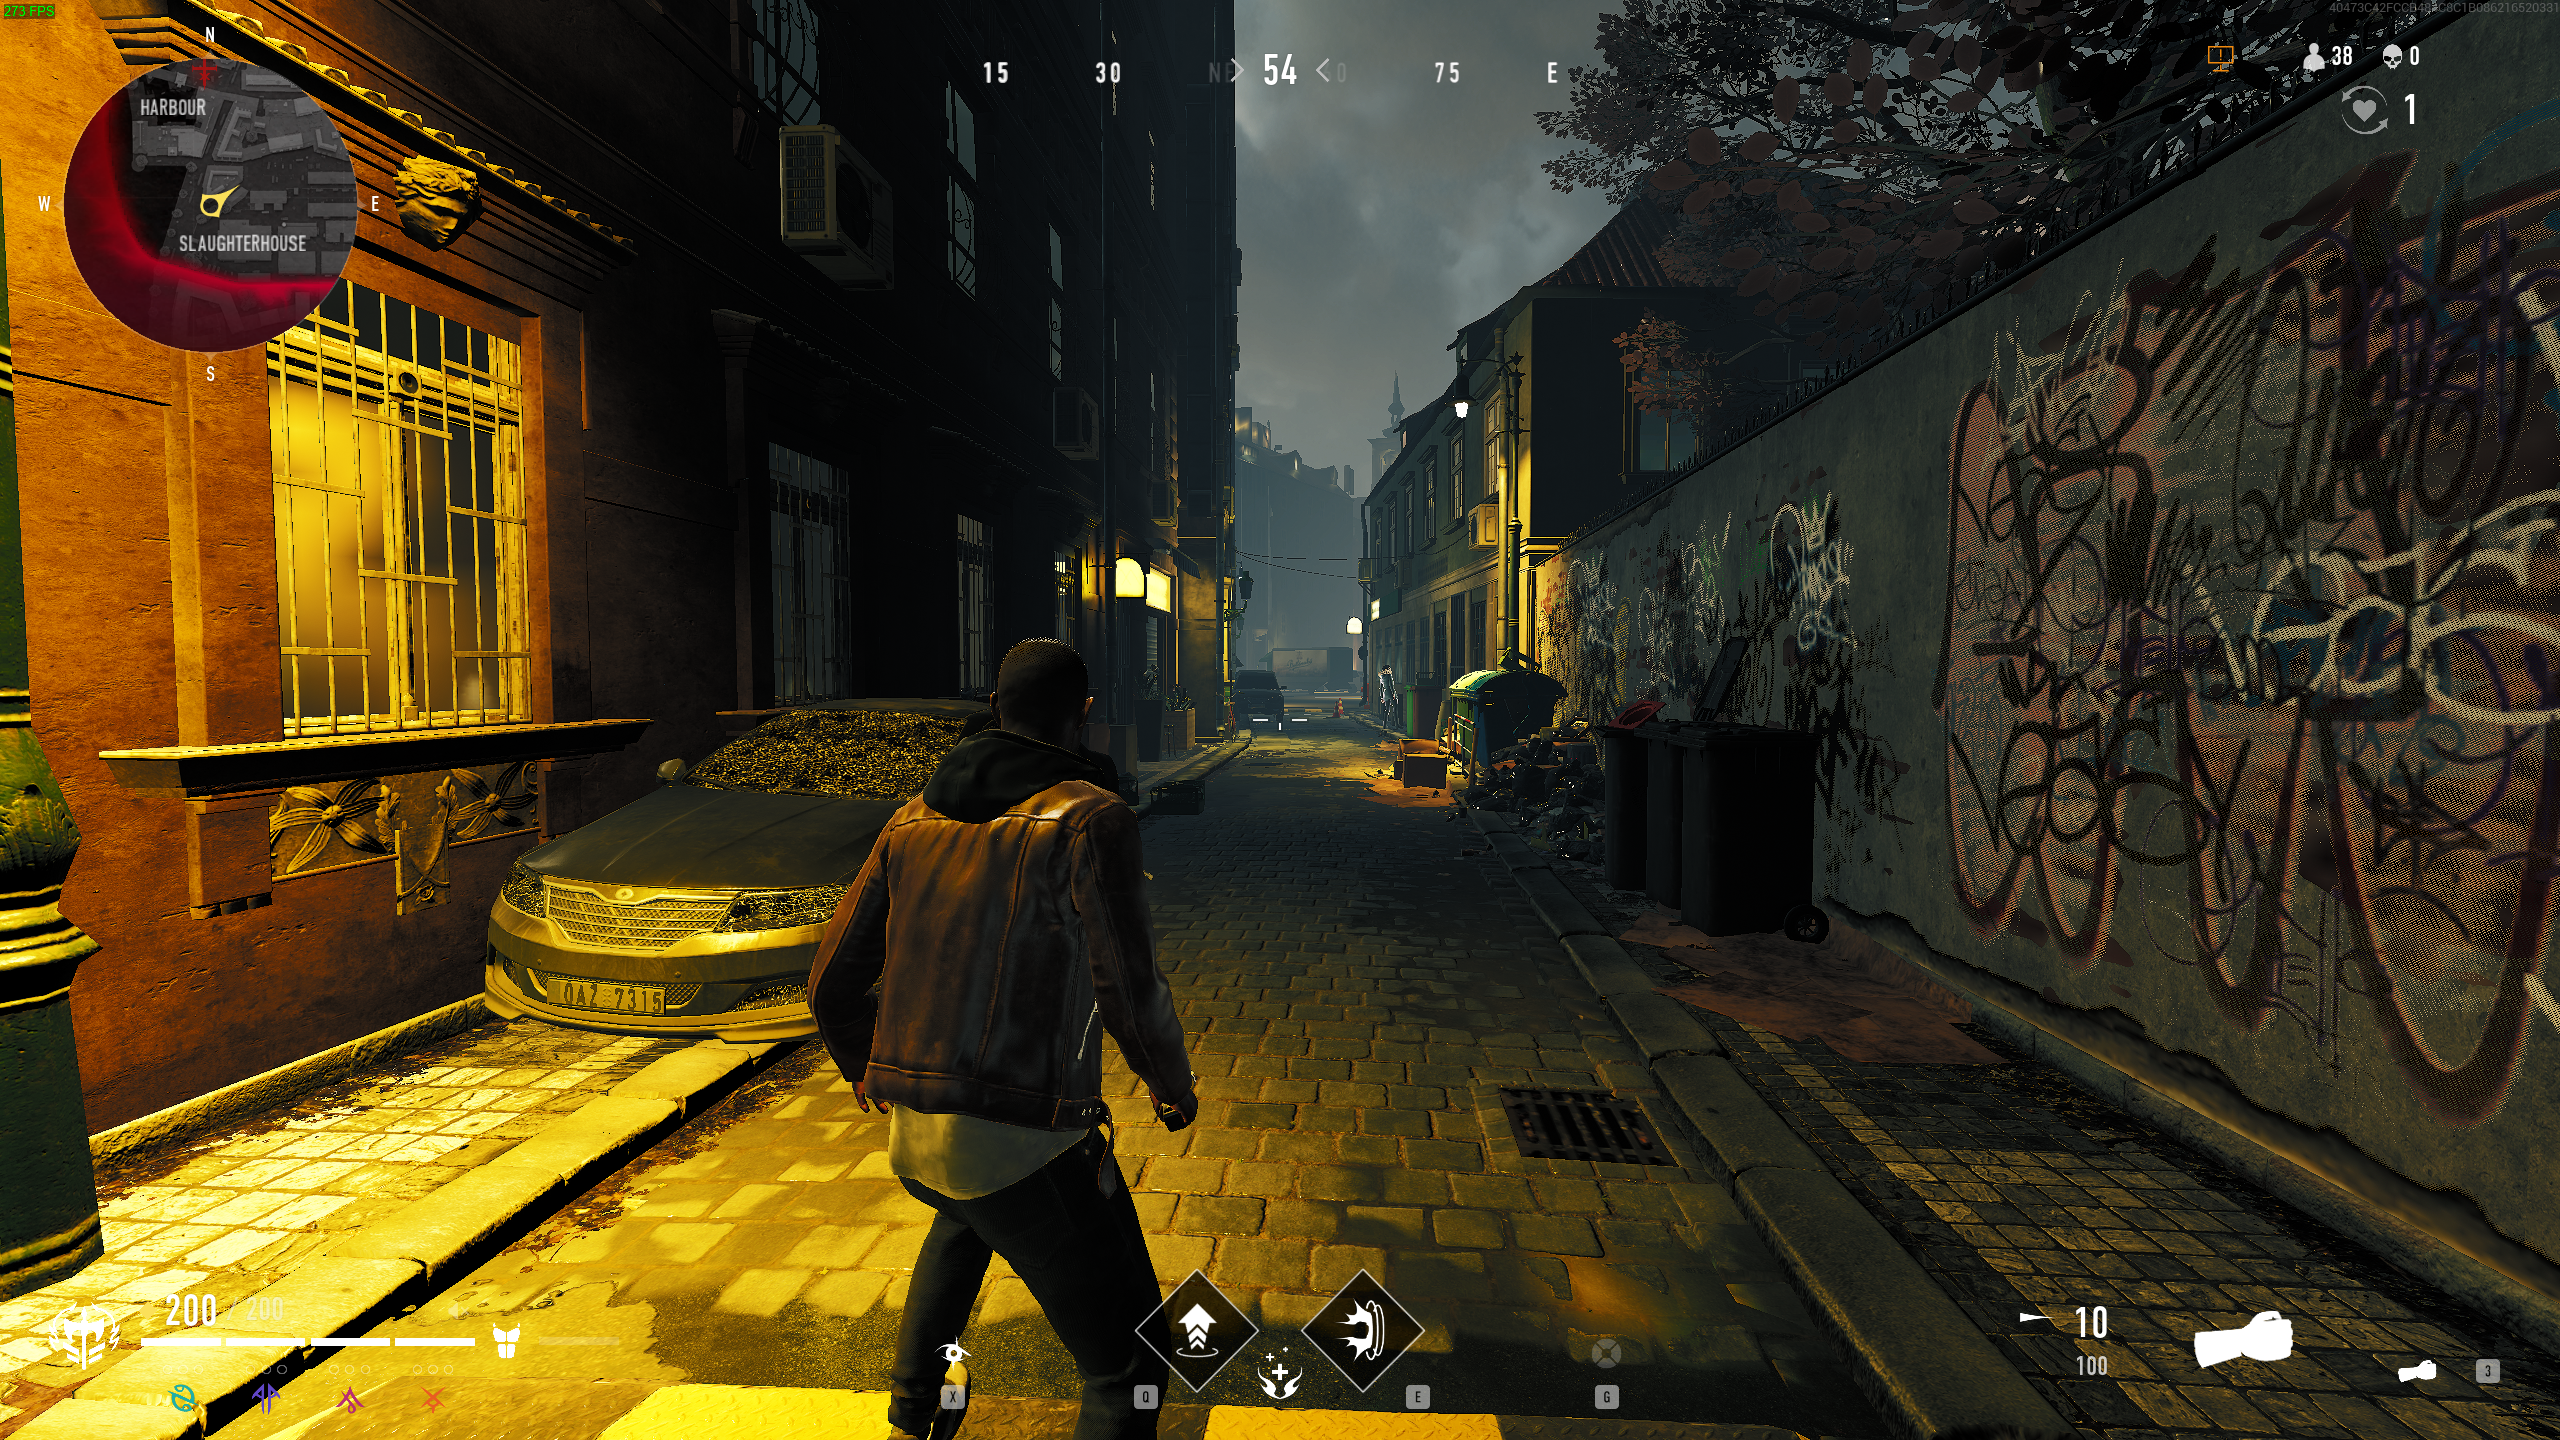 A in-game screenshot of Vampire: The Masquerade – Bloodhunt on its Low graphics preset.